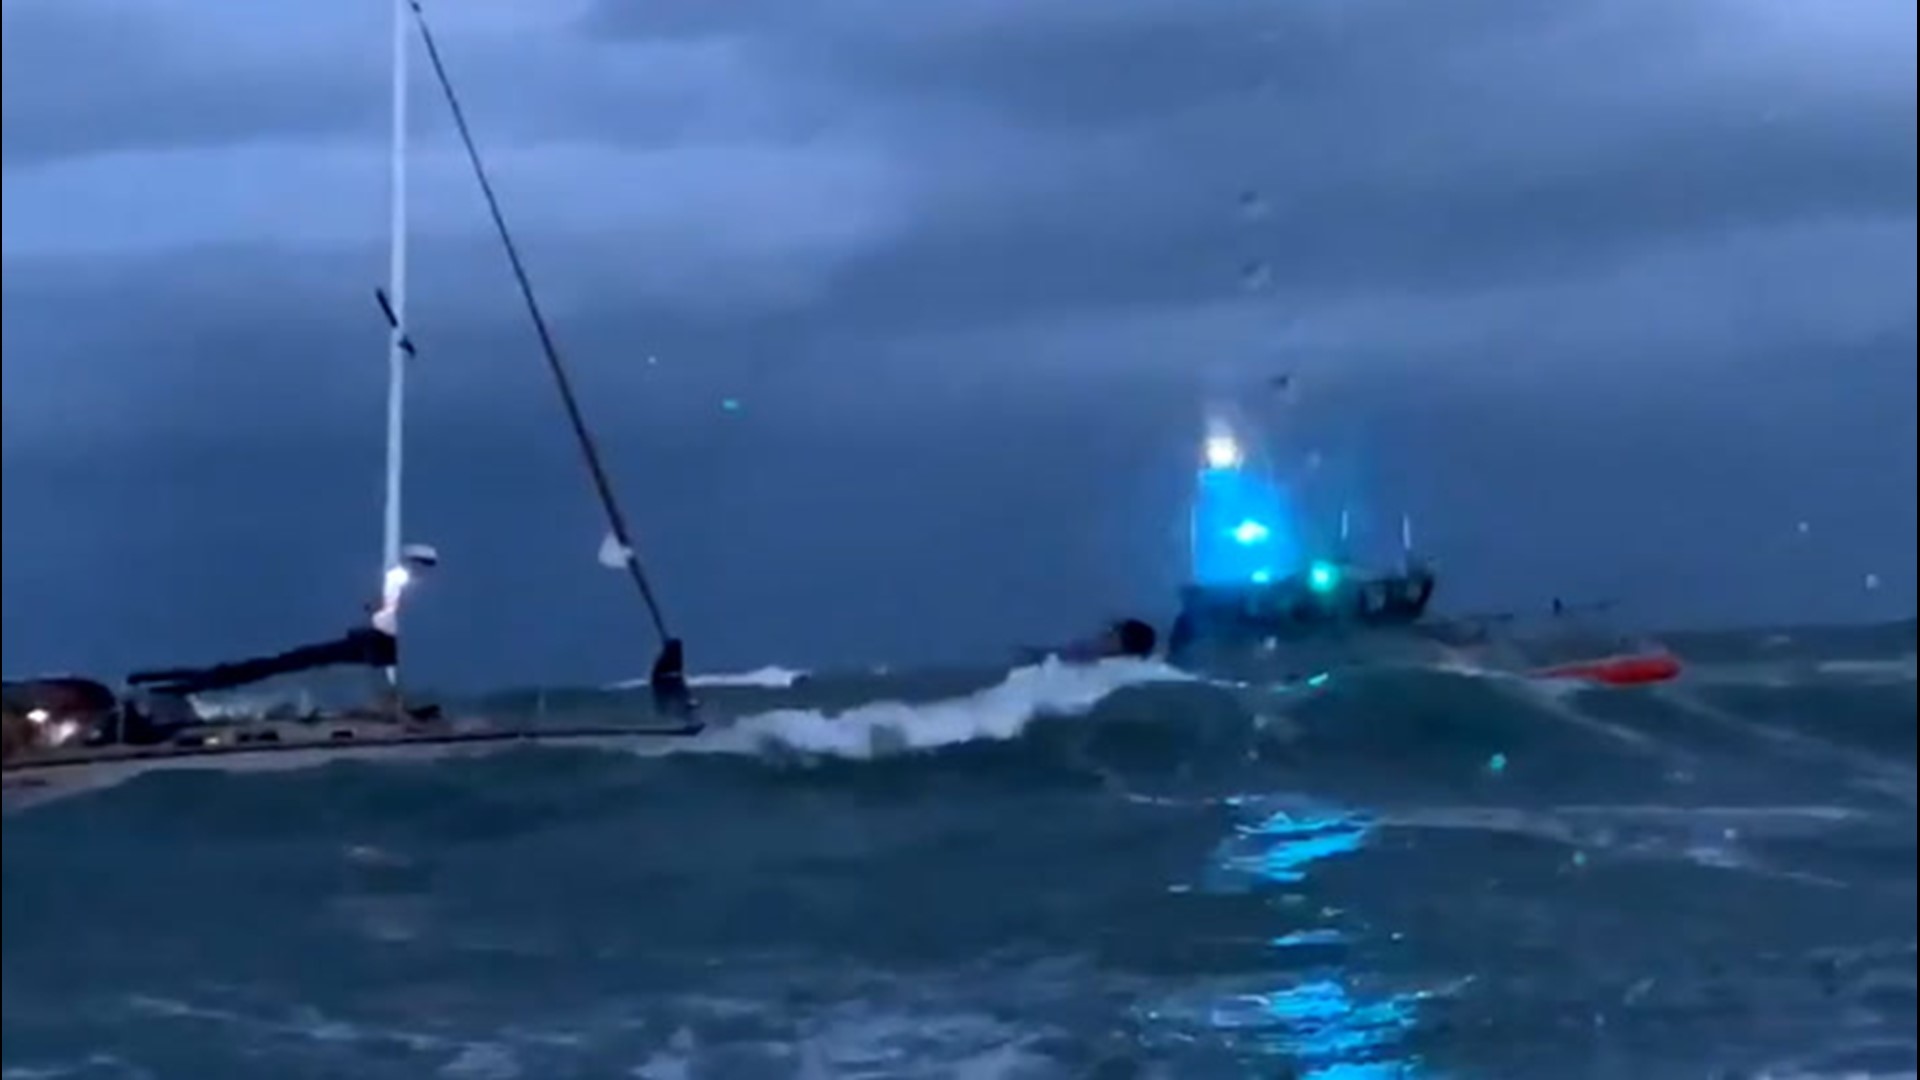 A sailing vessel struggled through rough waves off the coast of St. Petersburg, Florida, on Jan. 16. It needed the assistance of the Coast Guard.